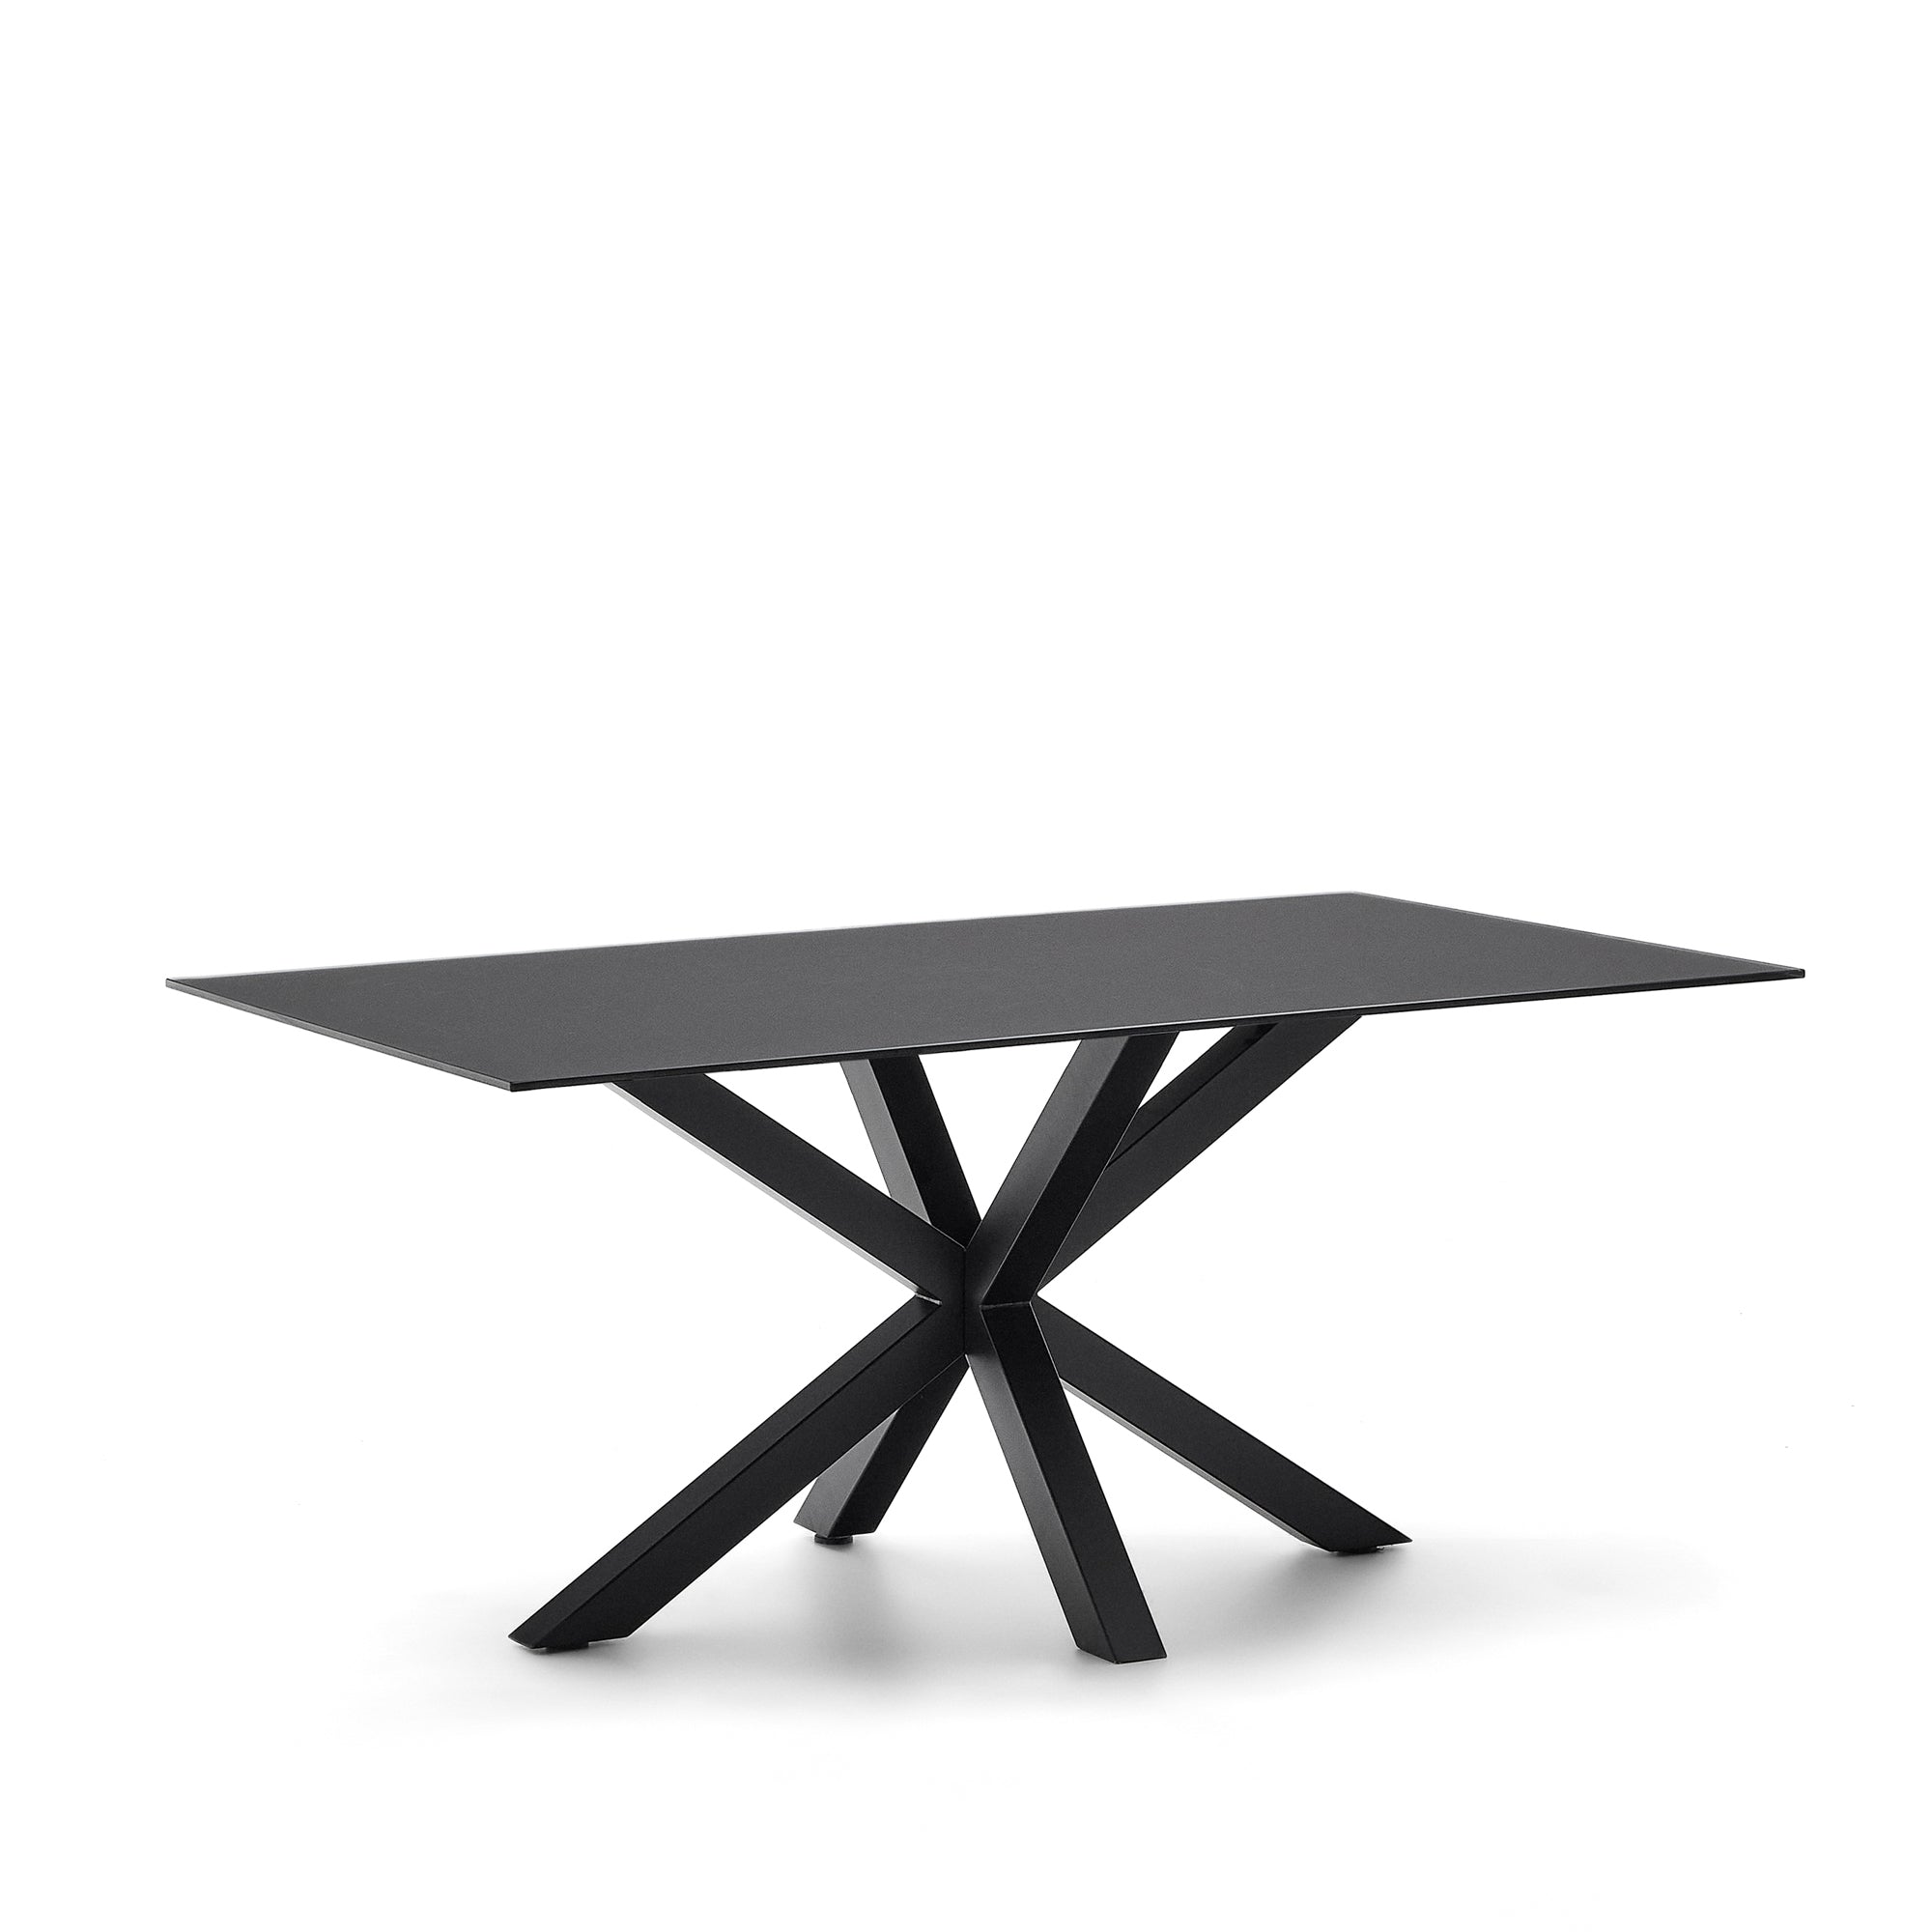 Argo table with black glass and black steel legs 180 x 190 cm